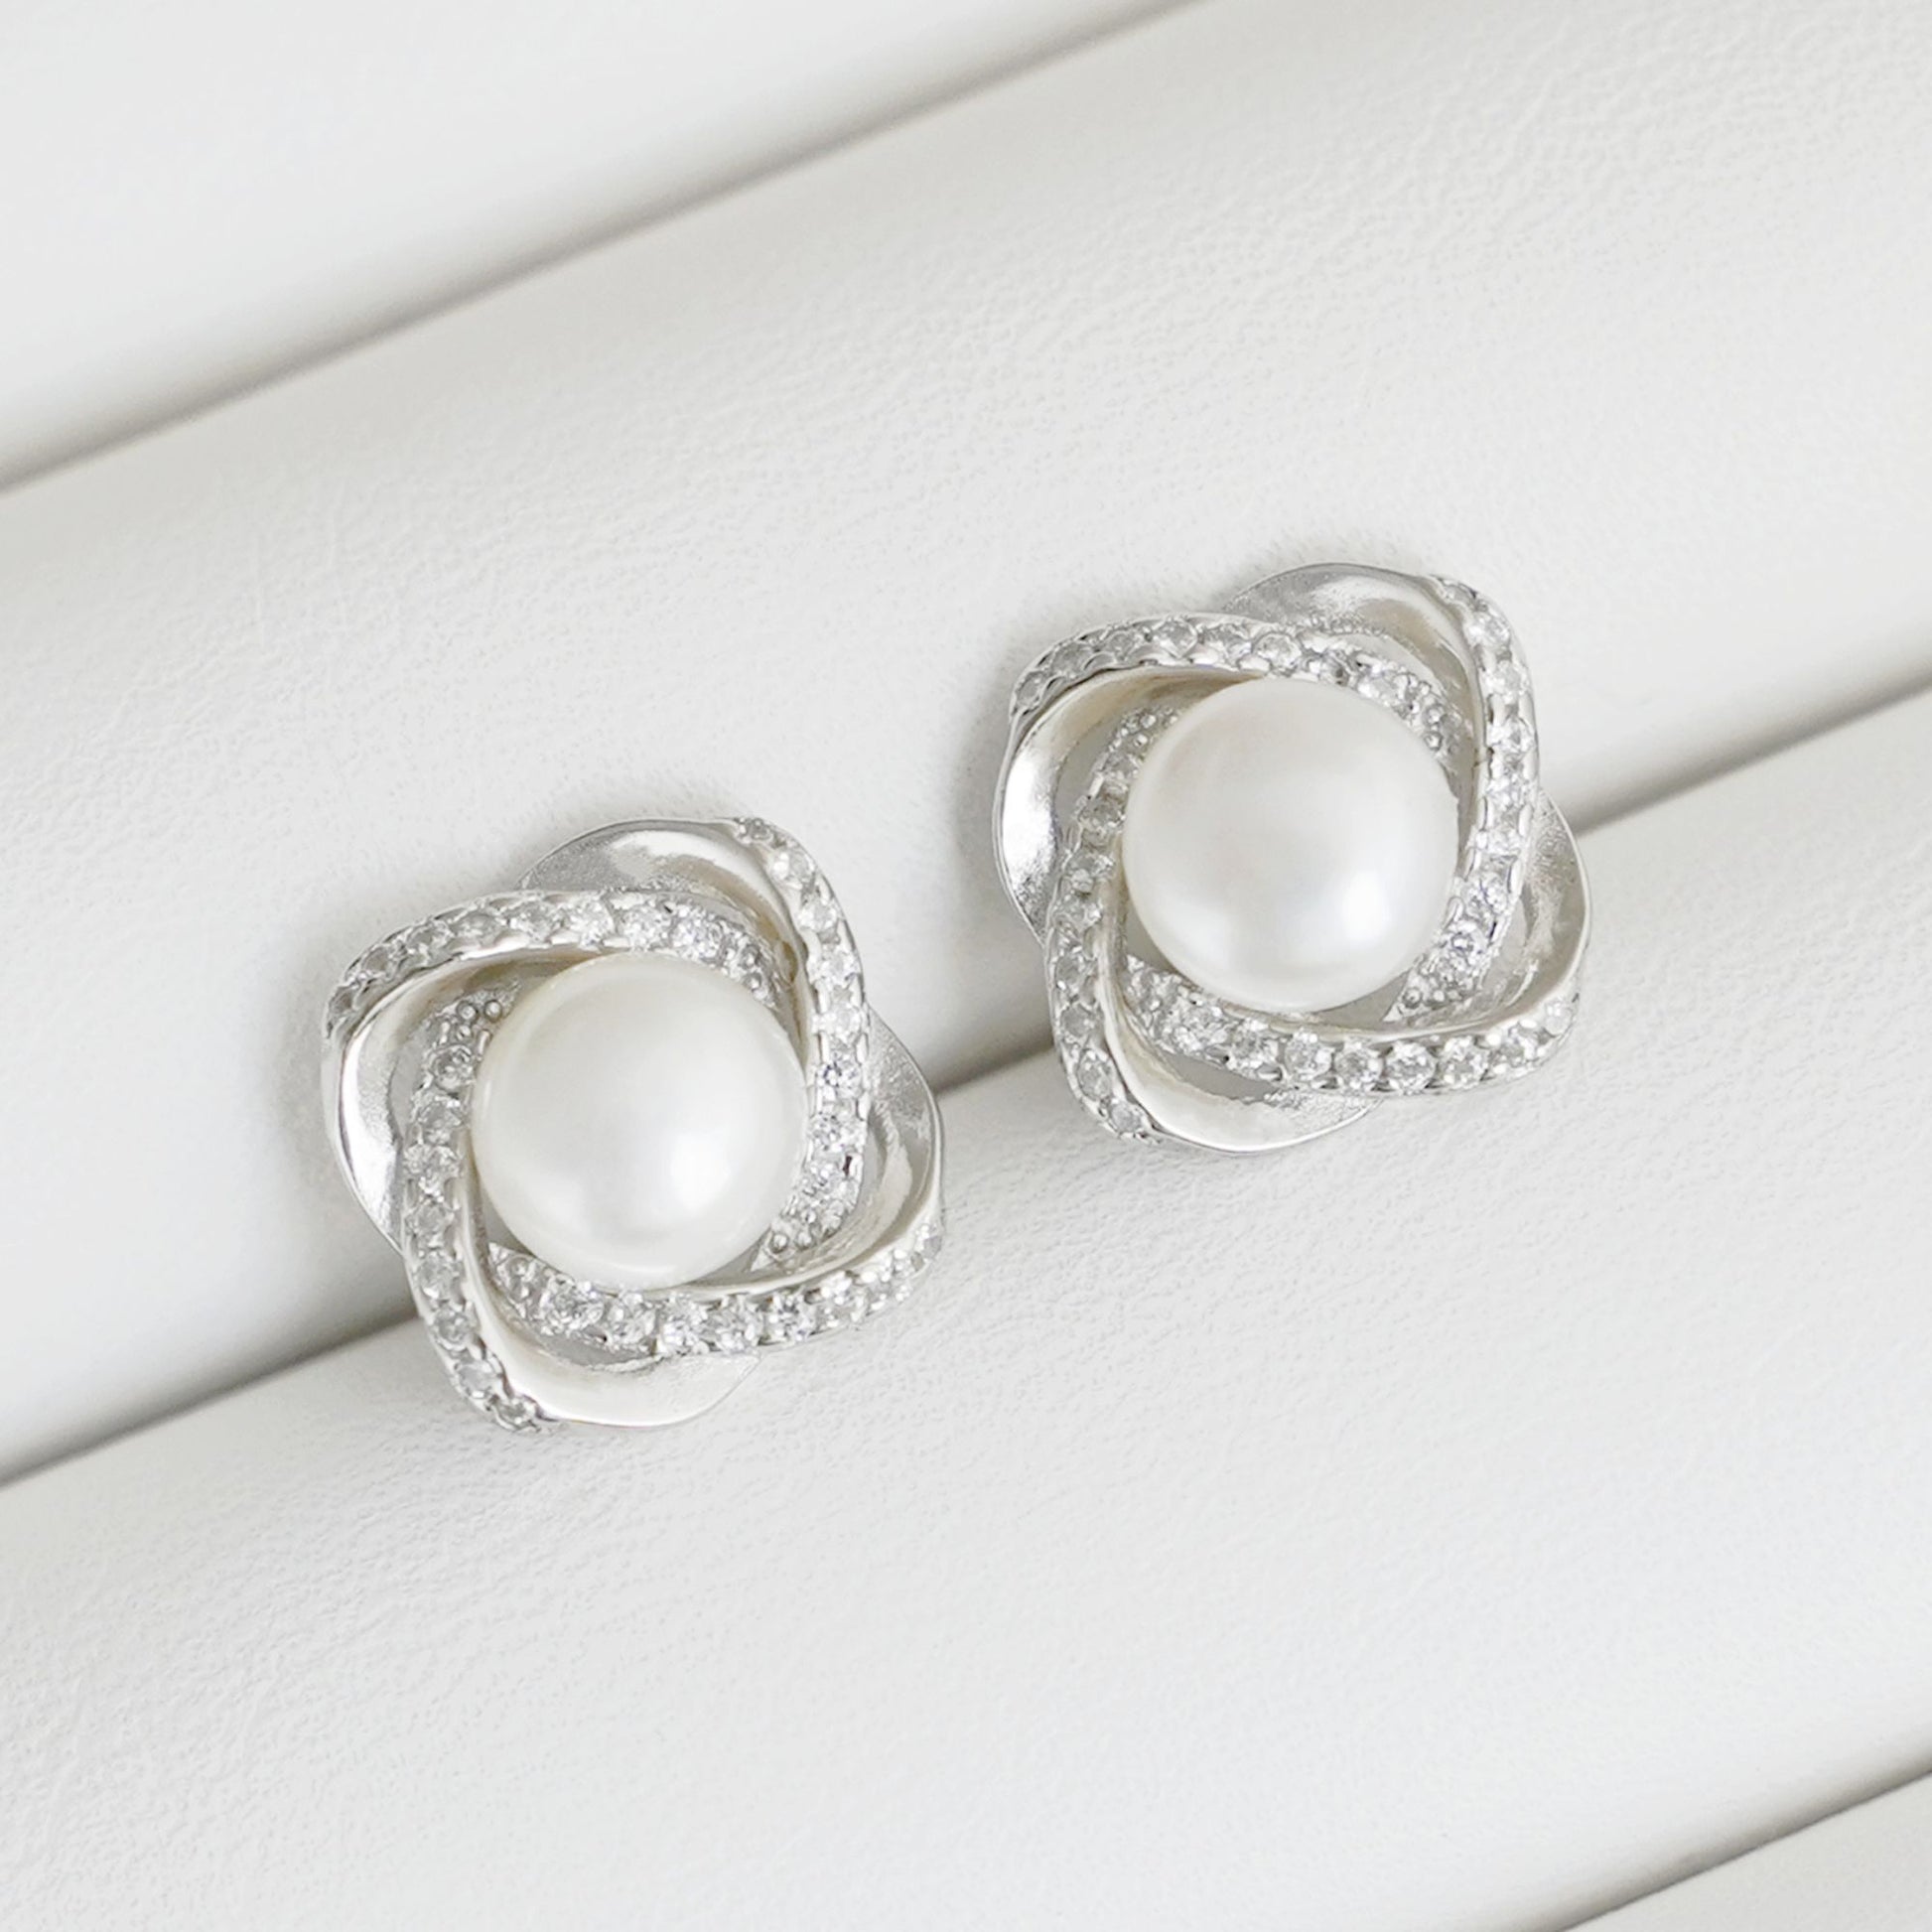 Sterling Silver Freshwater Pearl Stud Earrings with CZ Knots - 7mm White Button Pearls - sugarkittenlondon